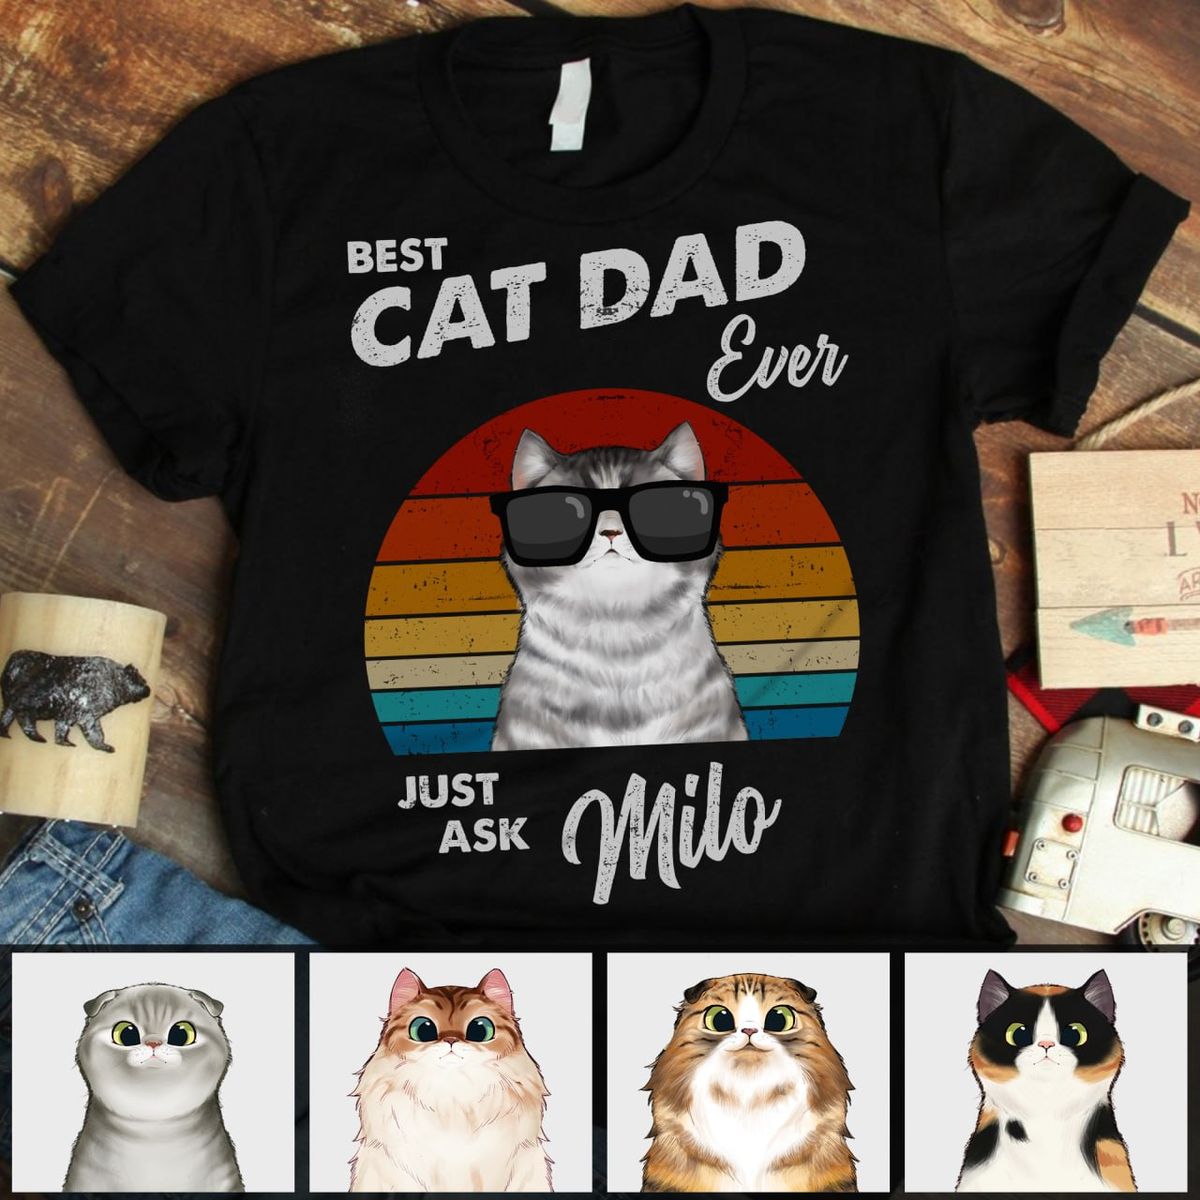 Personalized Shirt - Cat Dad - Best Cat Dad Ever. Just Ask...